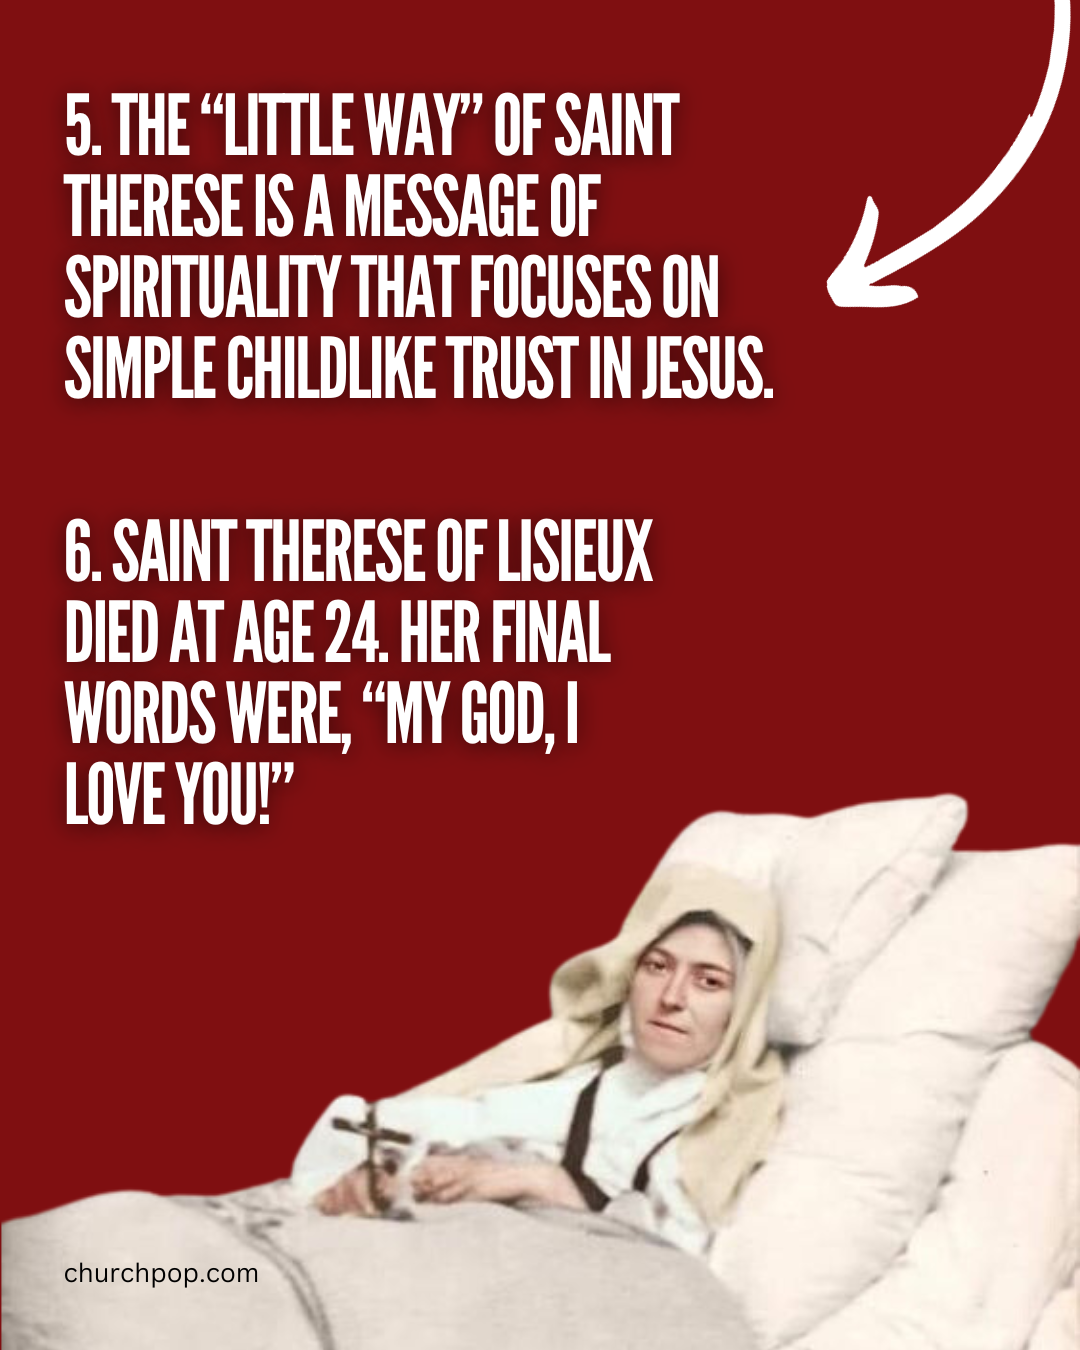 st. therese of lisieux, saint therese france